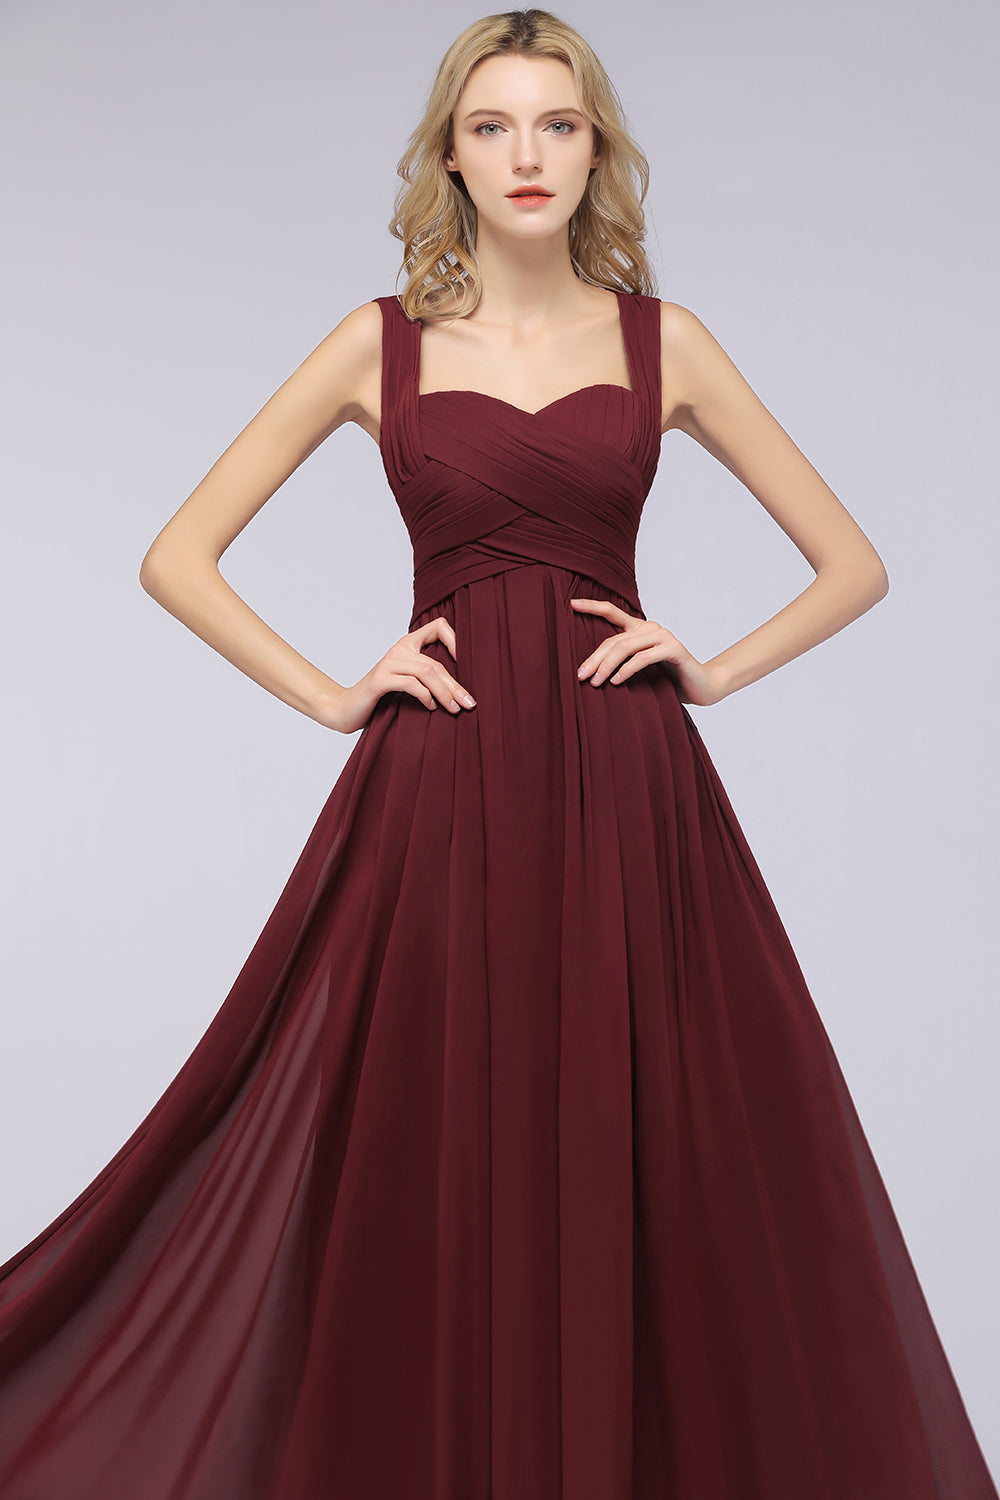 Chic Tiered Sweetheart Cap-Sleeves Bungurdy Bridesmaid Dresses